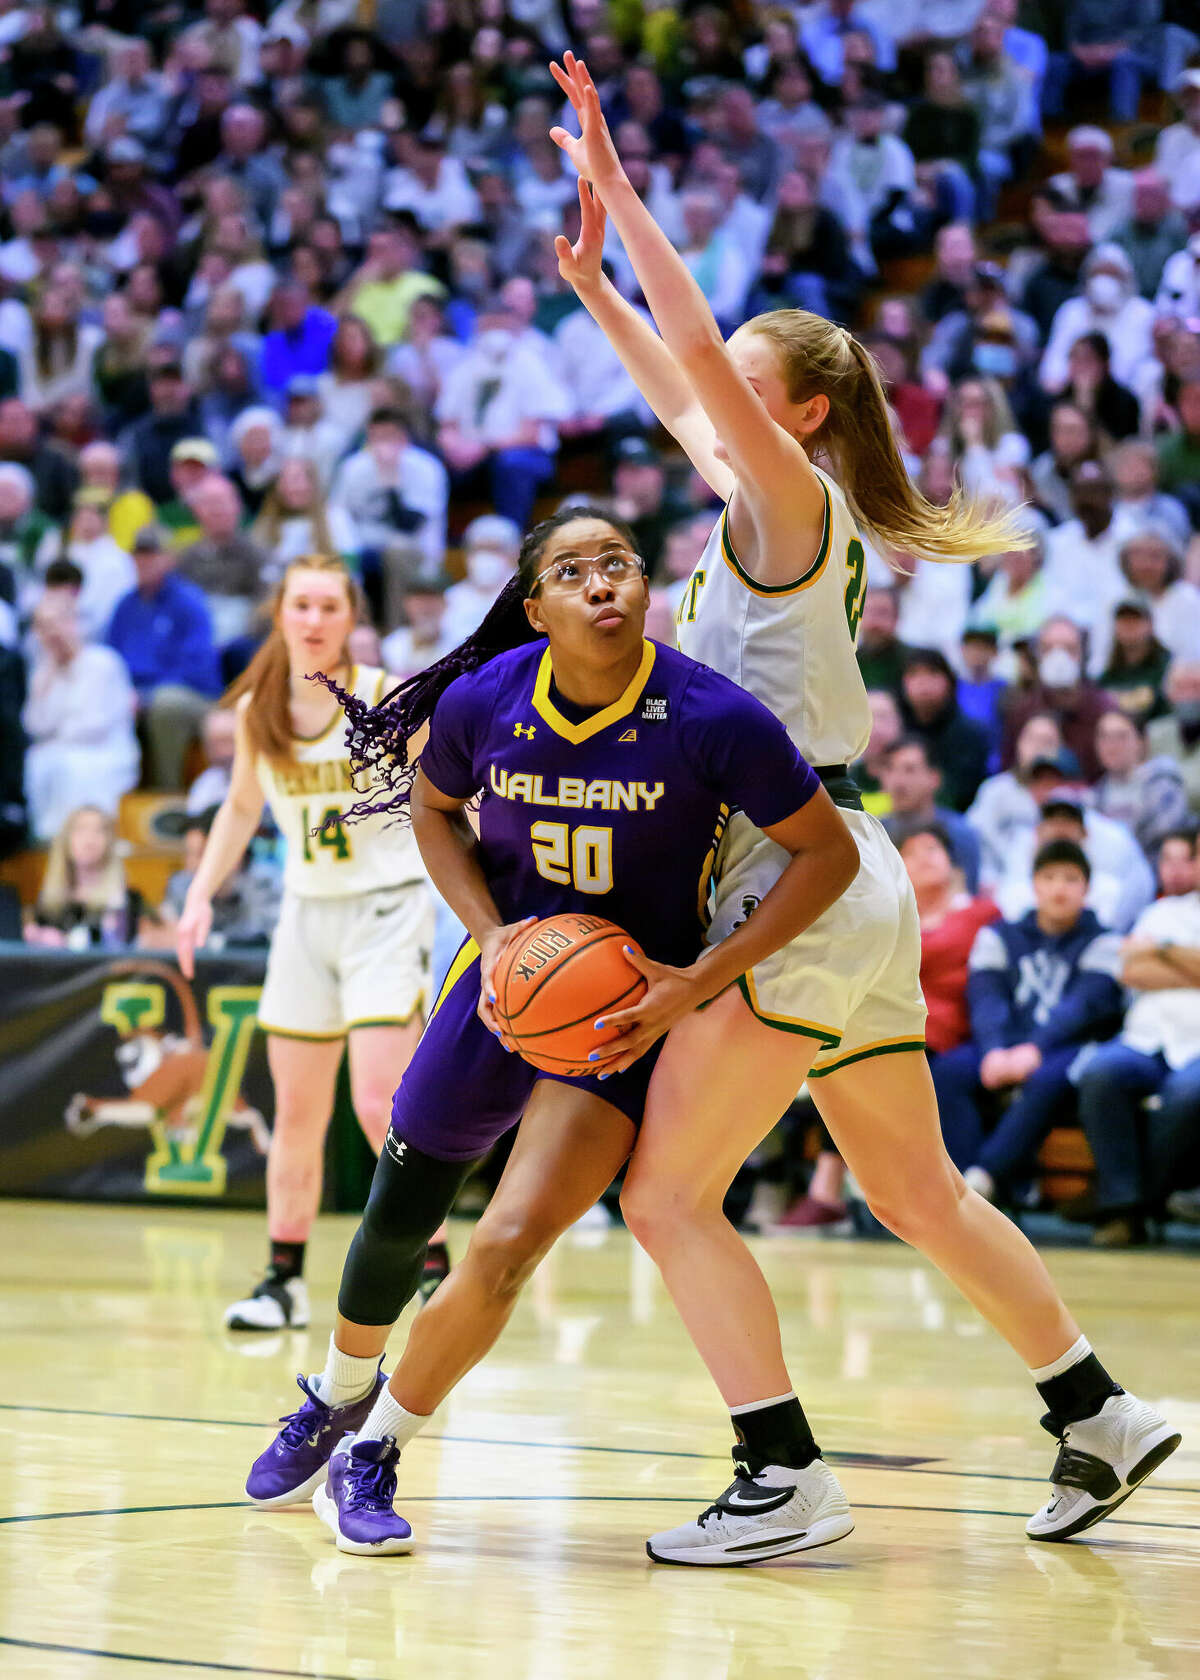 Kayla Cooper, left, of UAlbamy goes to the basket against Vermont in the America East title game Friday, March 10, 2023, at Patrick Gymnasium in Burlington, Vt.